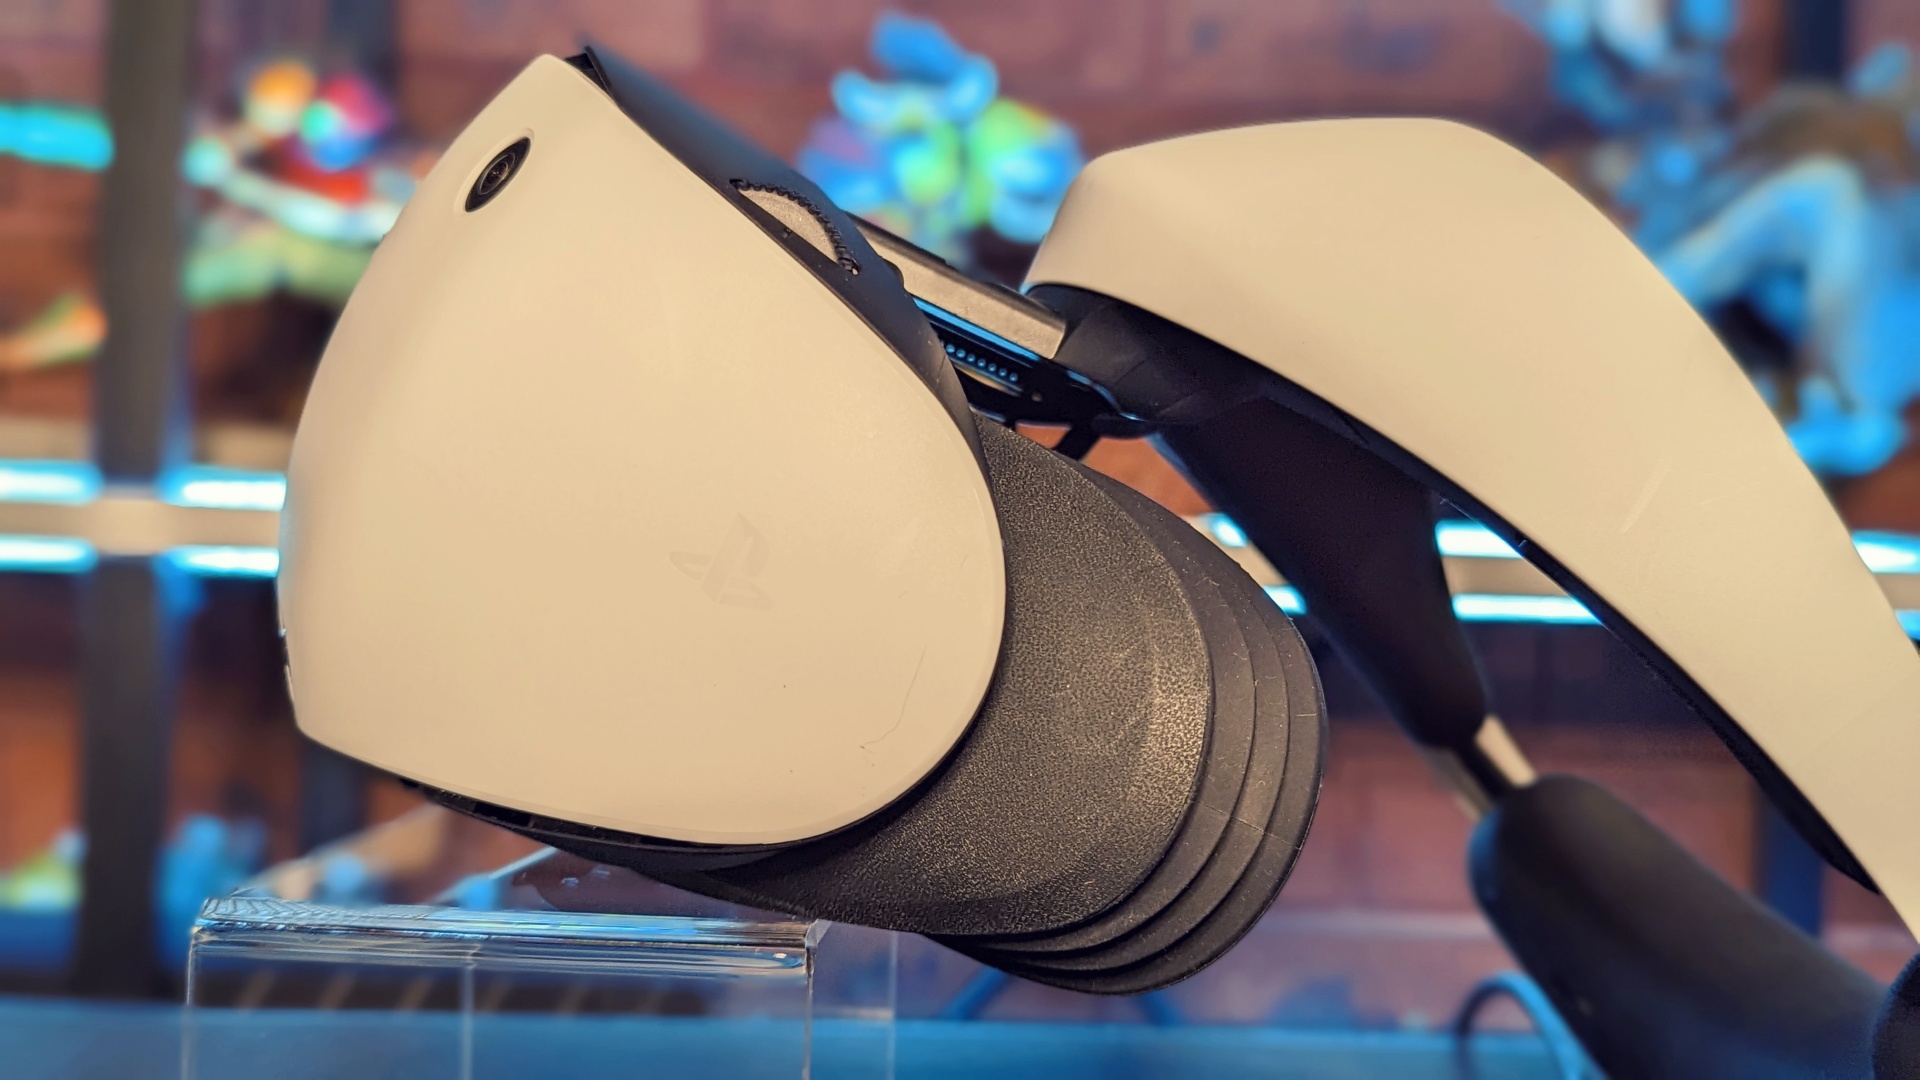 PlayStation VR2 Review – An Upgrade As Opposed To A Revelation